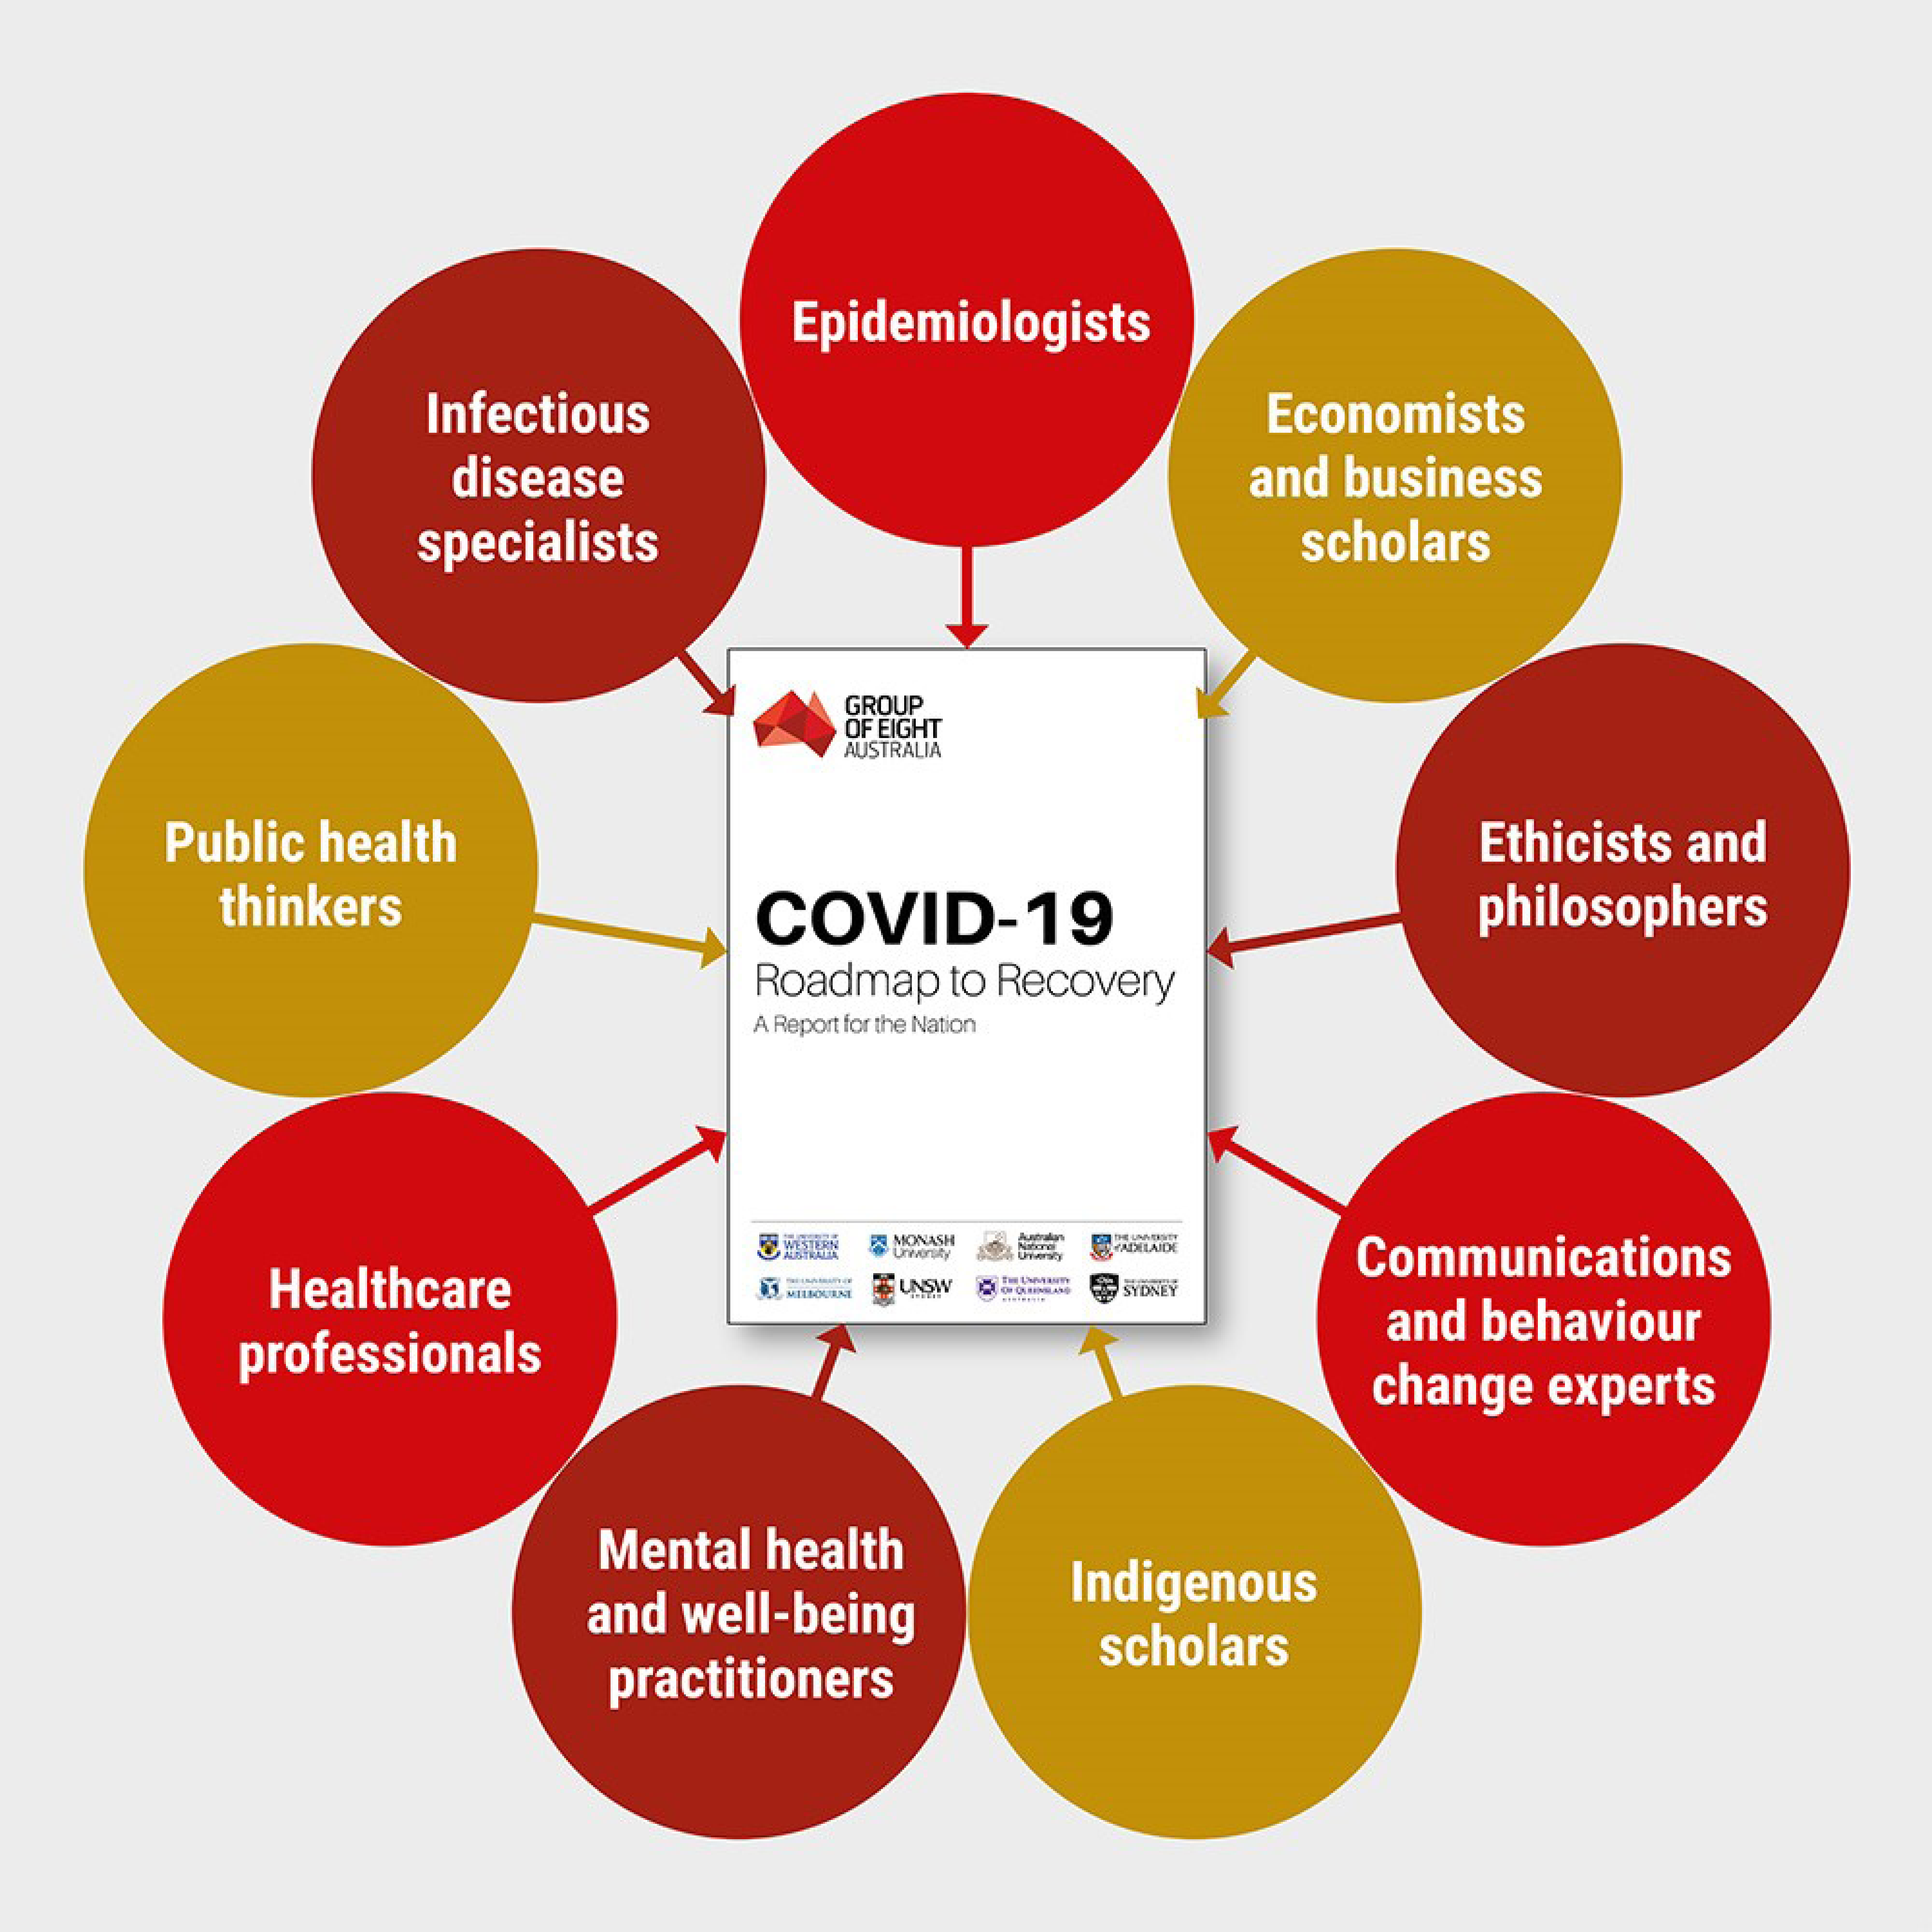 Poster for the COVID-19 Roadmap to Recovery: A Report for the Nation, produced by Group of Eight Australia with the support of epidemiologists, economists and business scholars, ethicists and philosophers, communications and behaviour change experts, indigenous scholars, mental health and well-being practitioners, healthcare professionals, public health thinkers, and infections disease specialists.